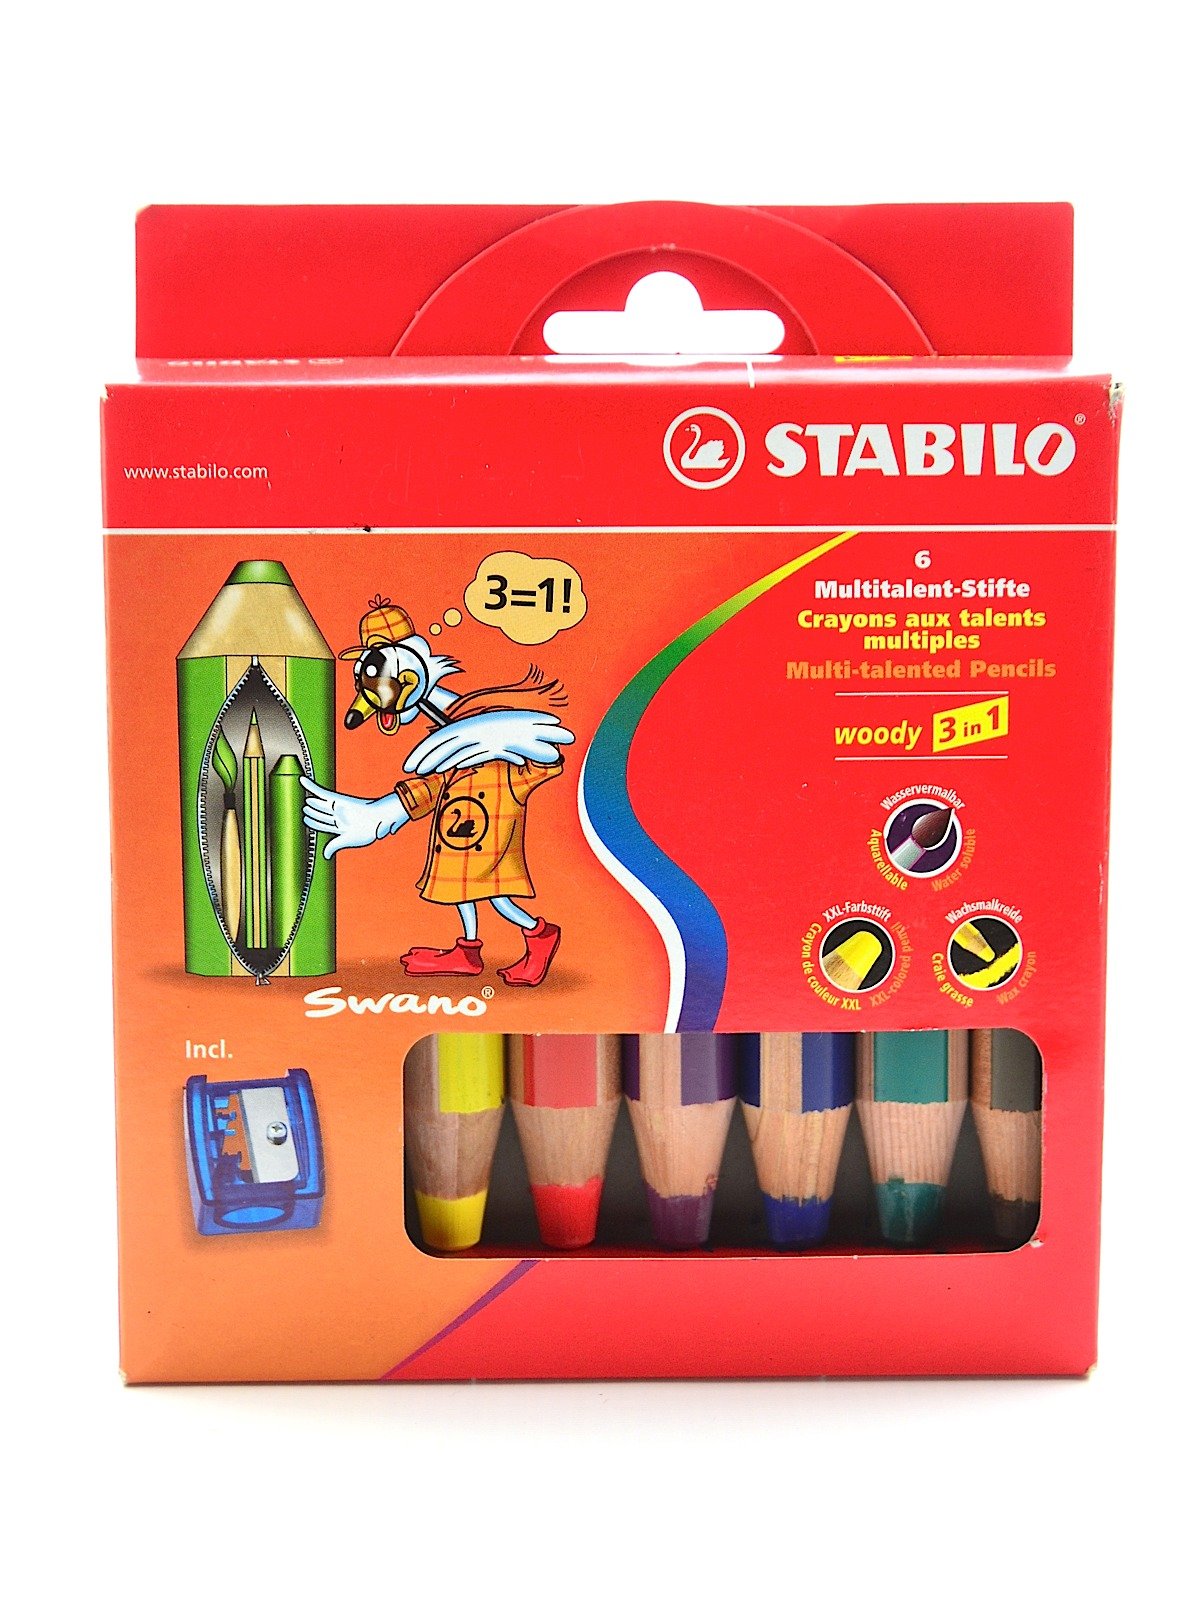 Stabilo - Woody 3 in 1 Pencil set of 6 with Sharpener